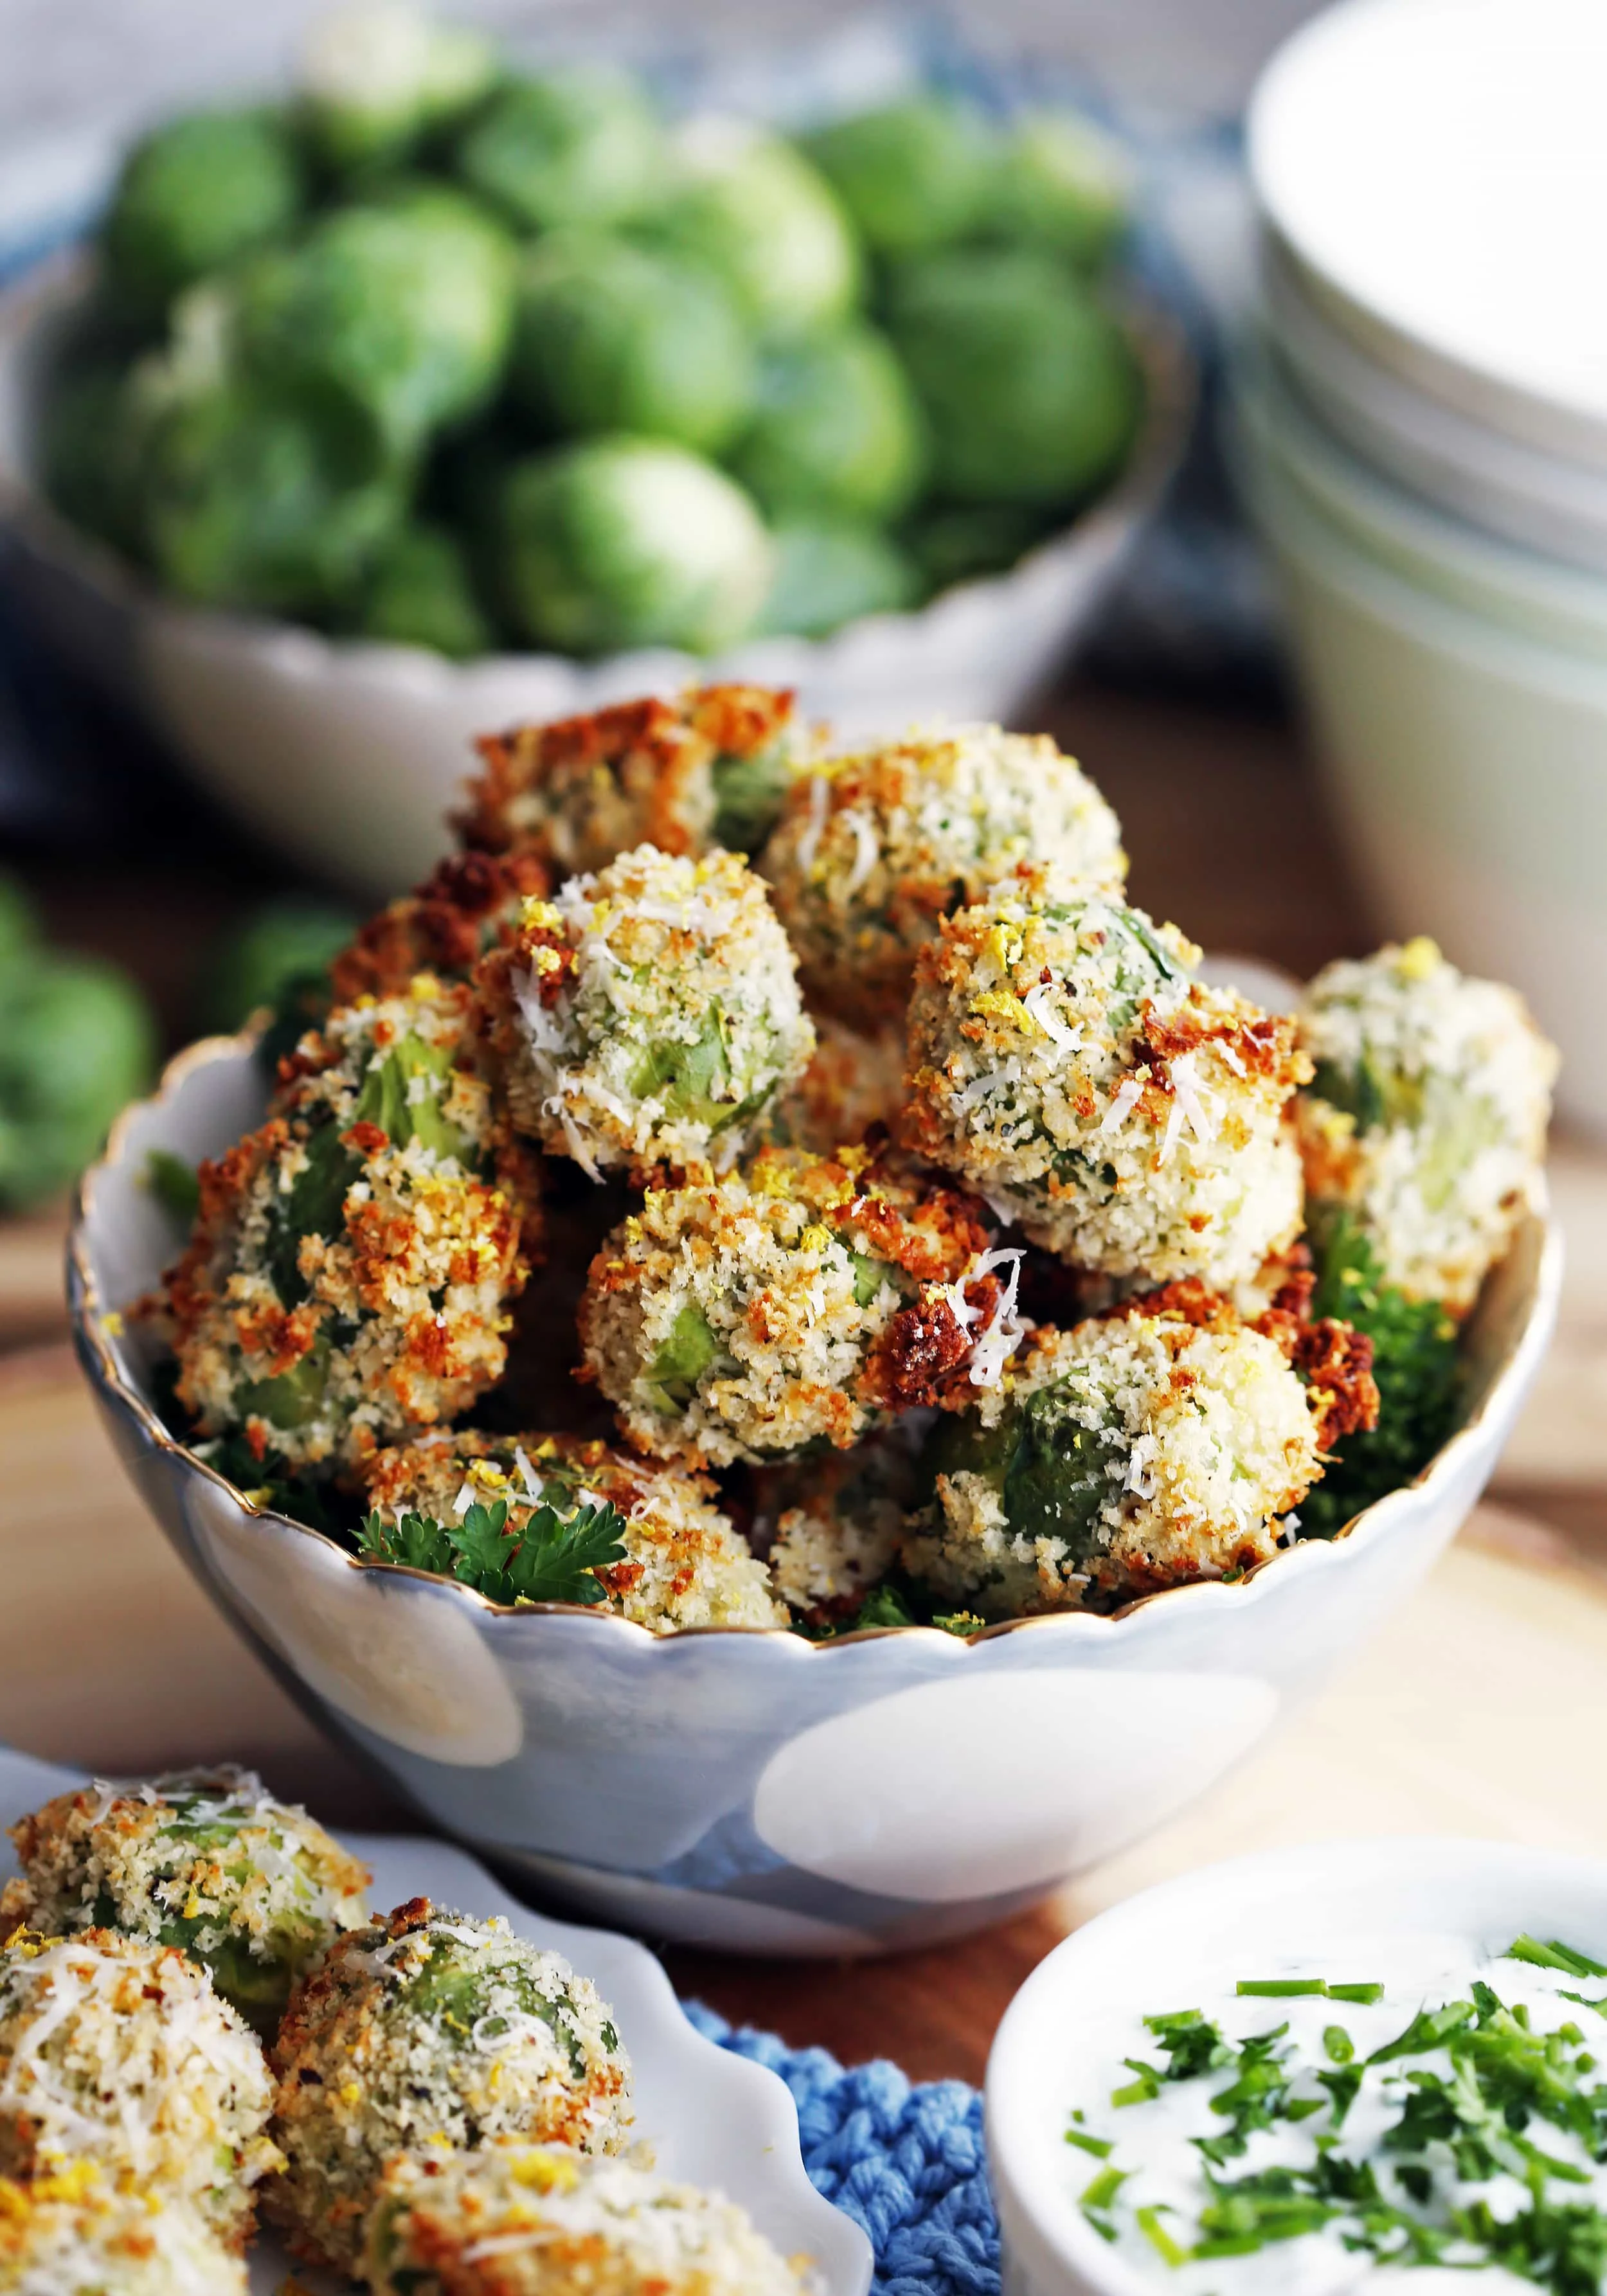 Baked parmesan Panko breadcrumb Brussels sprouts piled in a blue bowl.